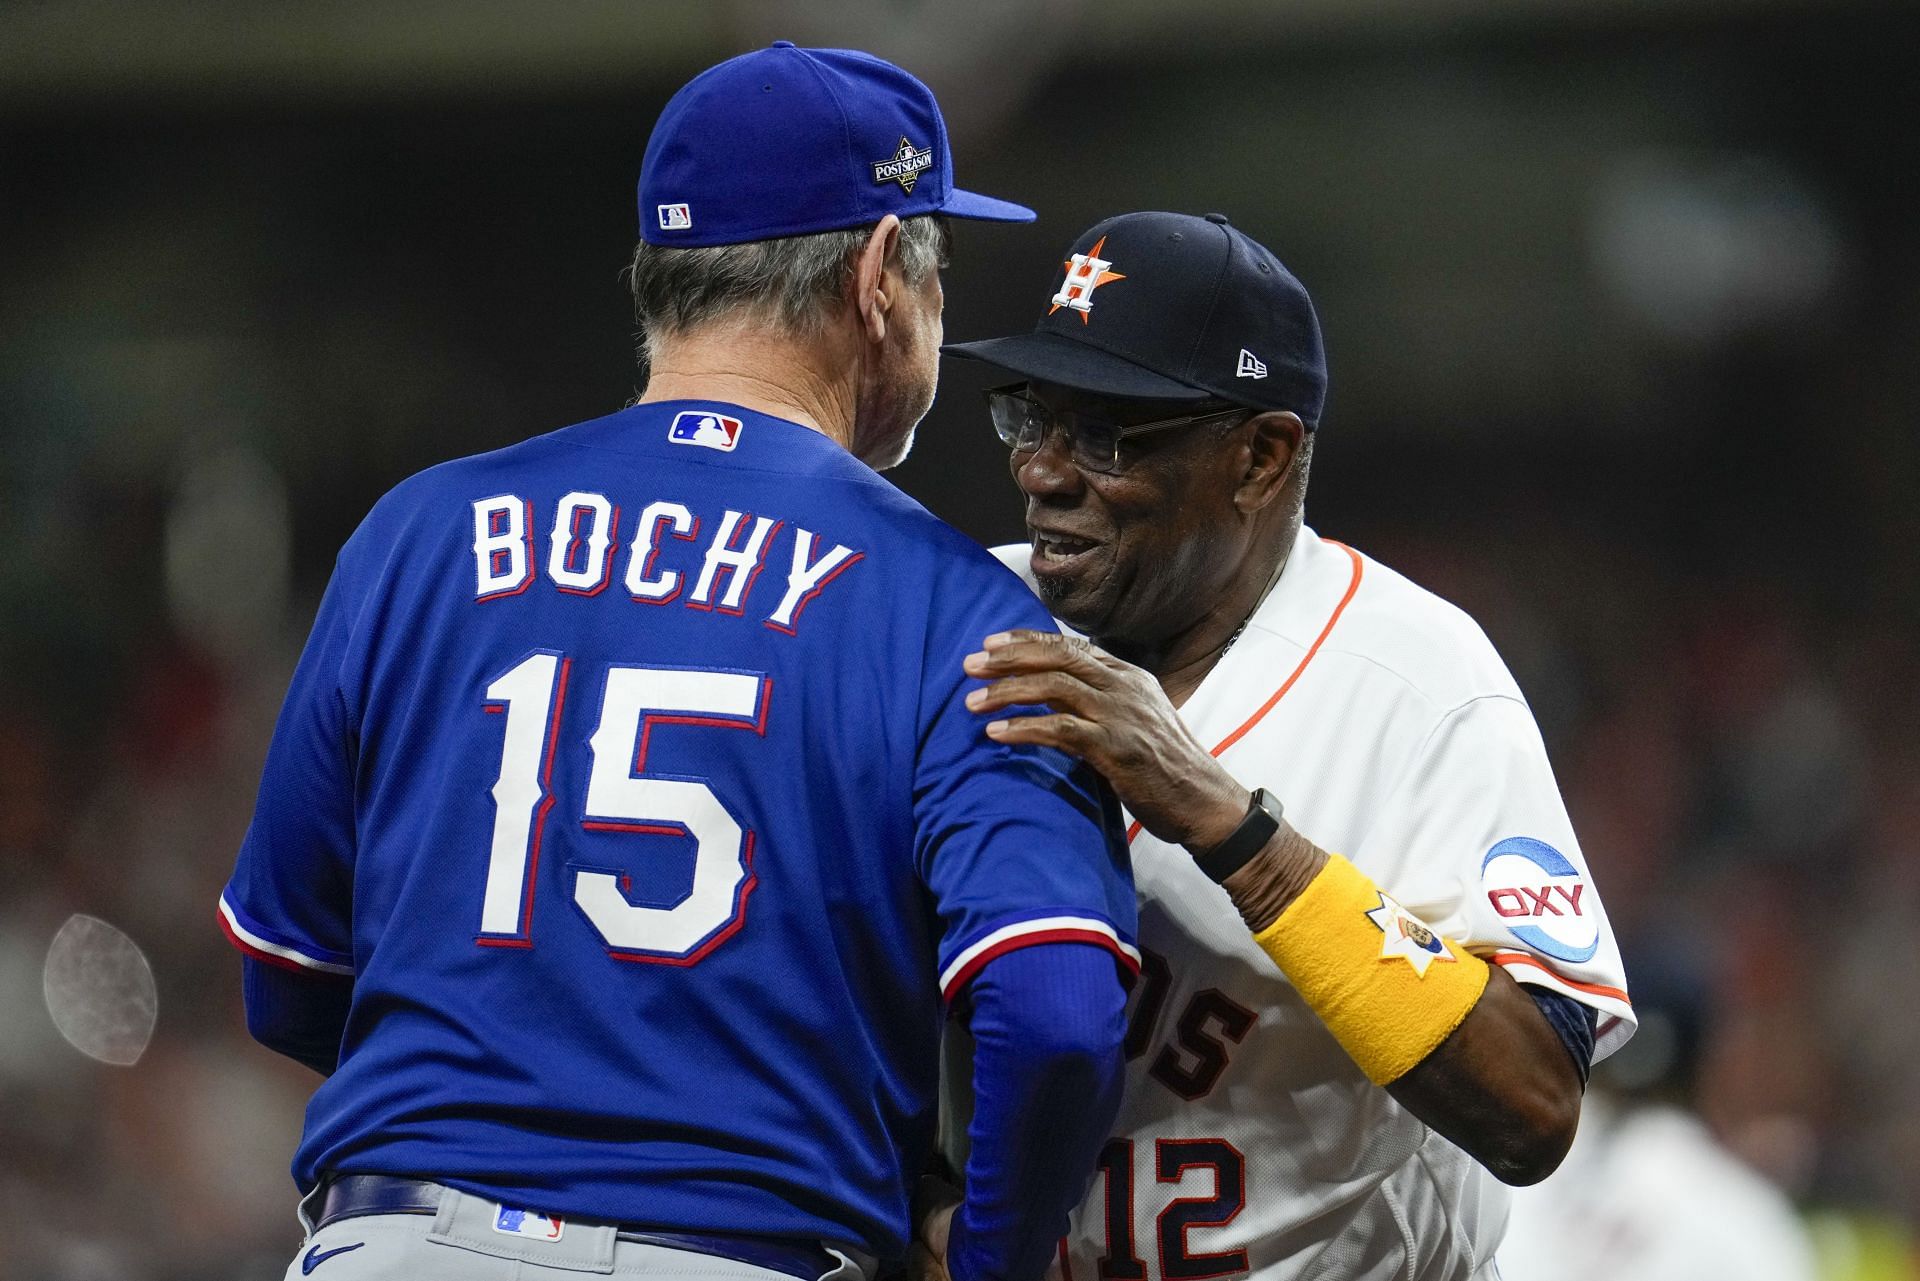 Houston manager Dusty Baker shakes hands with Texas manager Bruce Bochy before Game 1 of the AL Championship Series